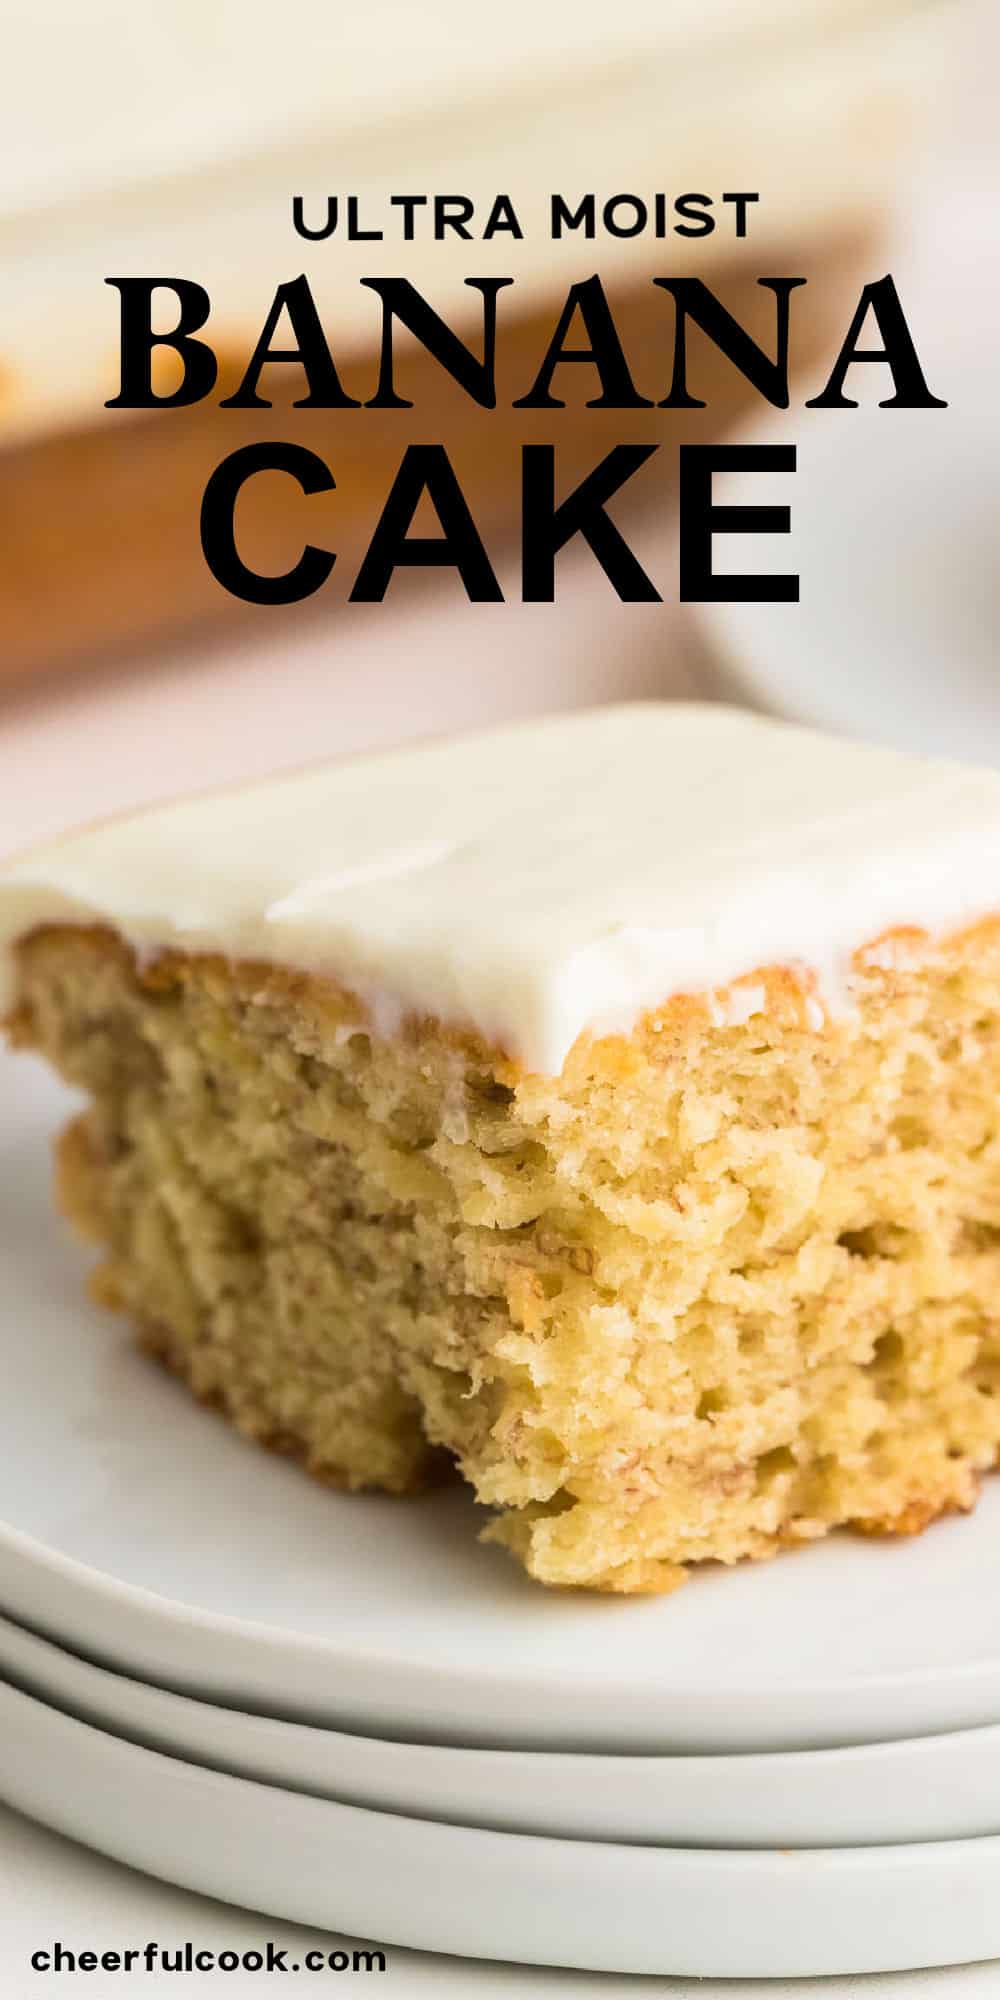 Meet your next go-to recipe for ripe bananas. This ultra moist, homemade Frosted Banana Cake is tasty and easy to make. #cheerfulcook #bananacake #dessert #recipe #easy via @cheerfulcook